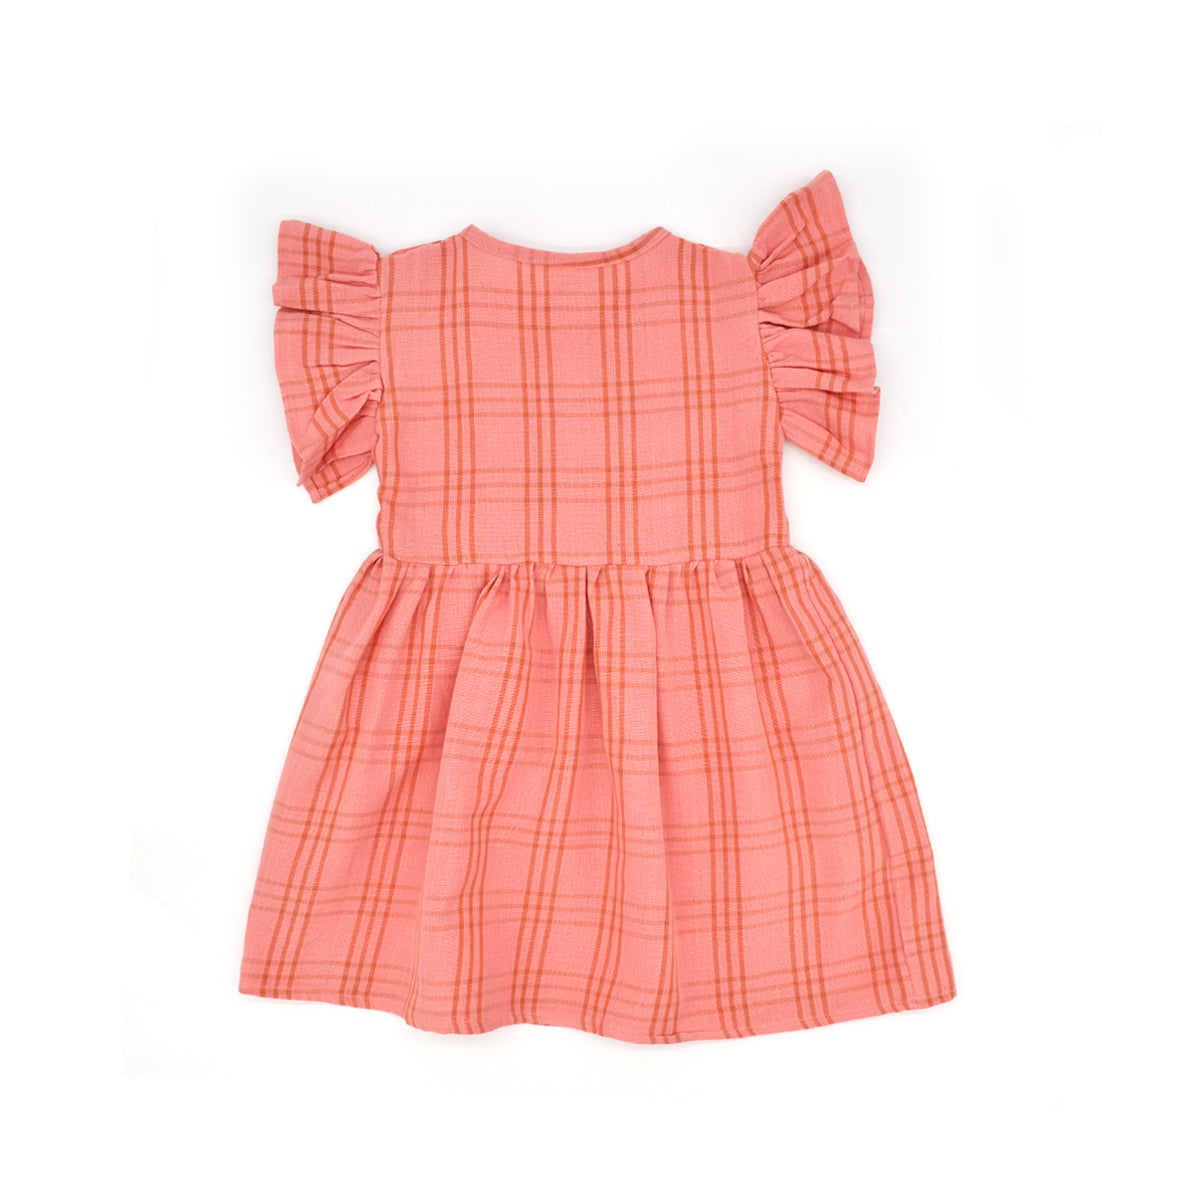 Cece Girl Dress in Amber by Folklore Las Ninas